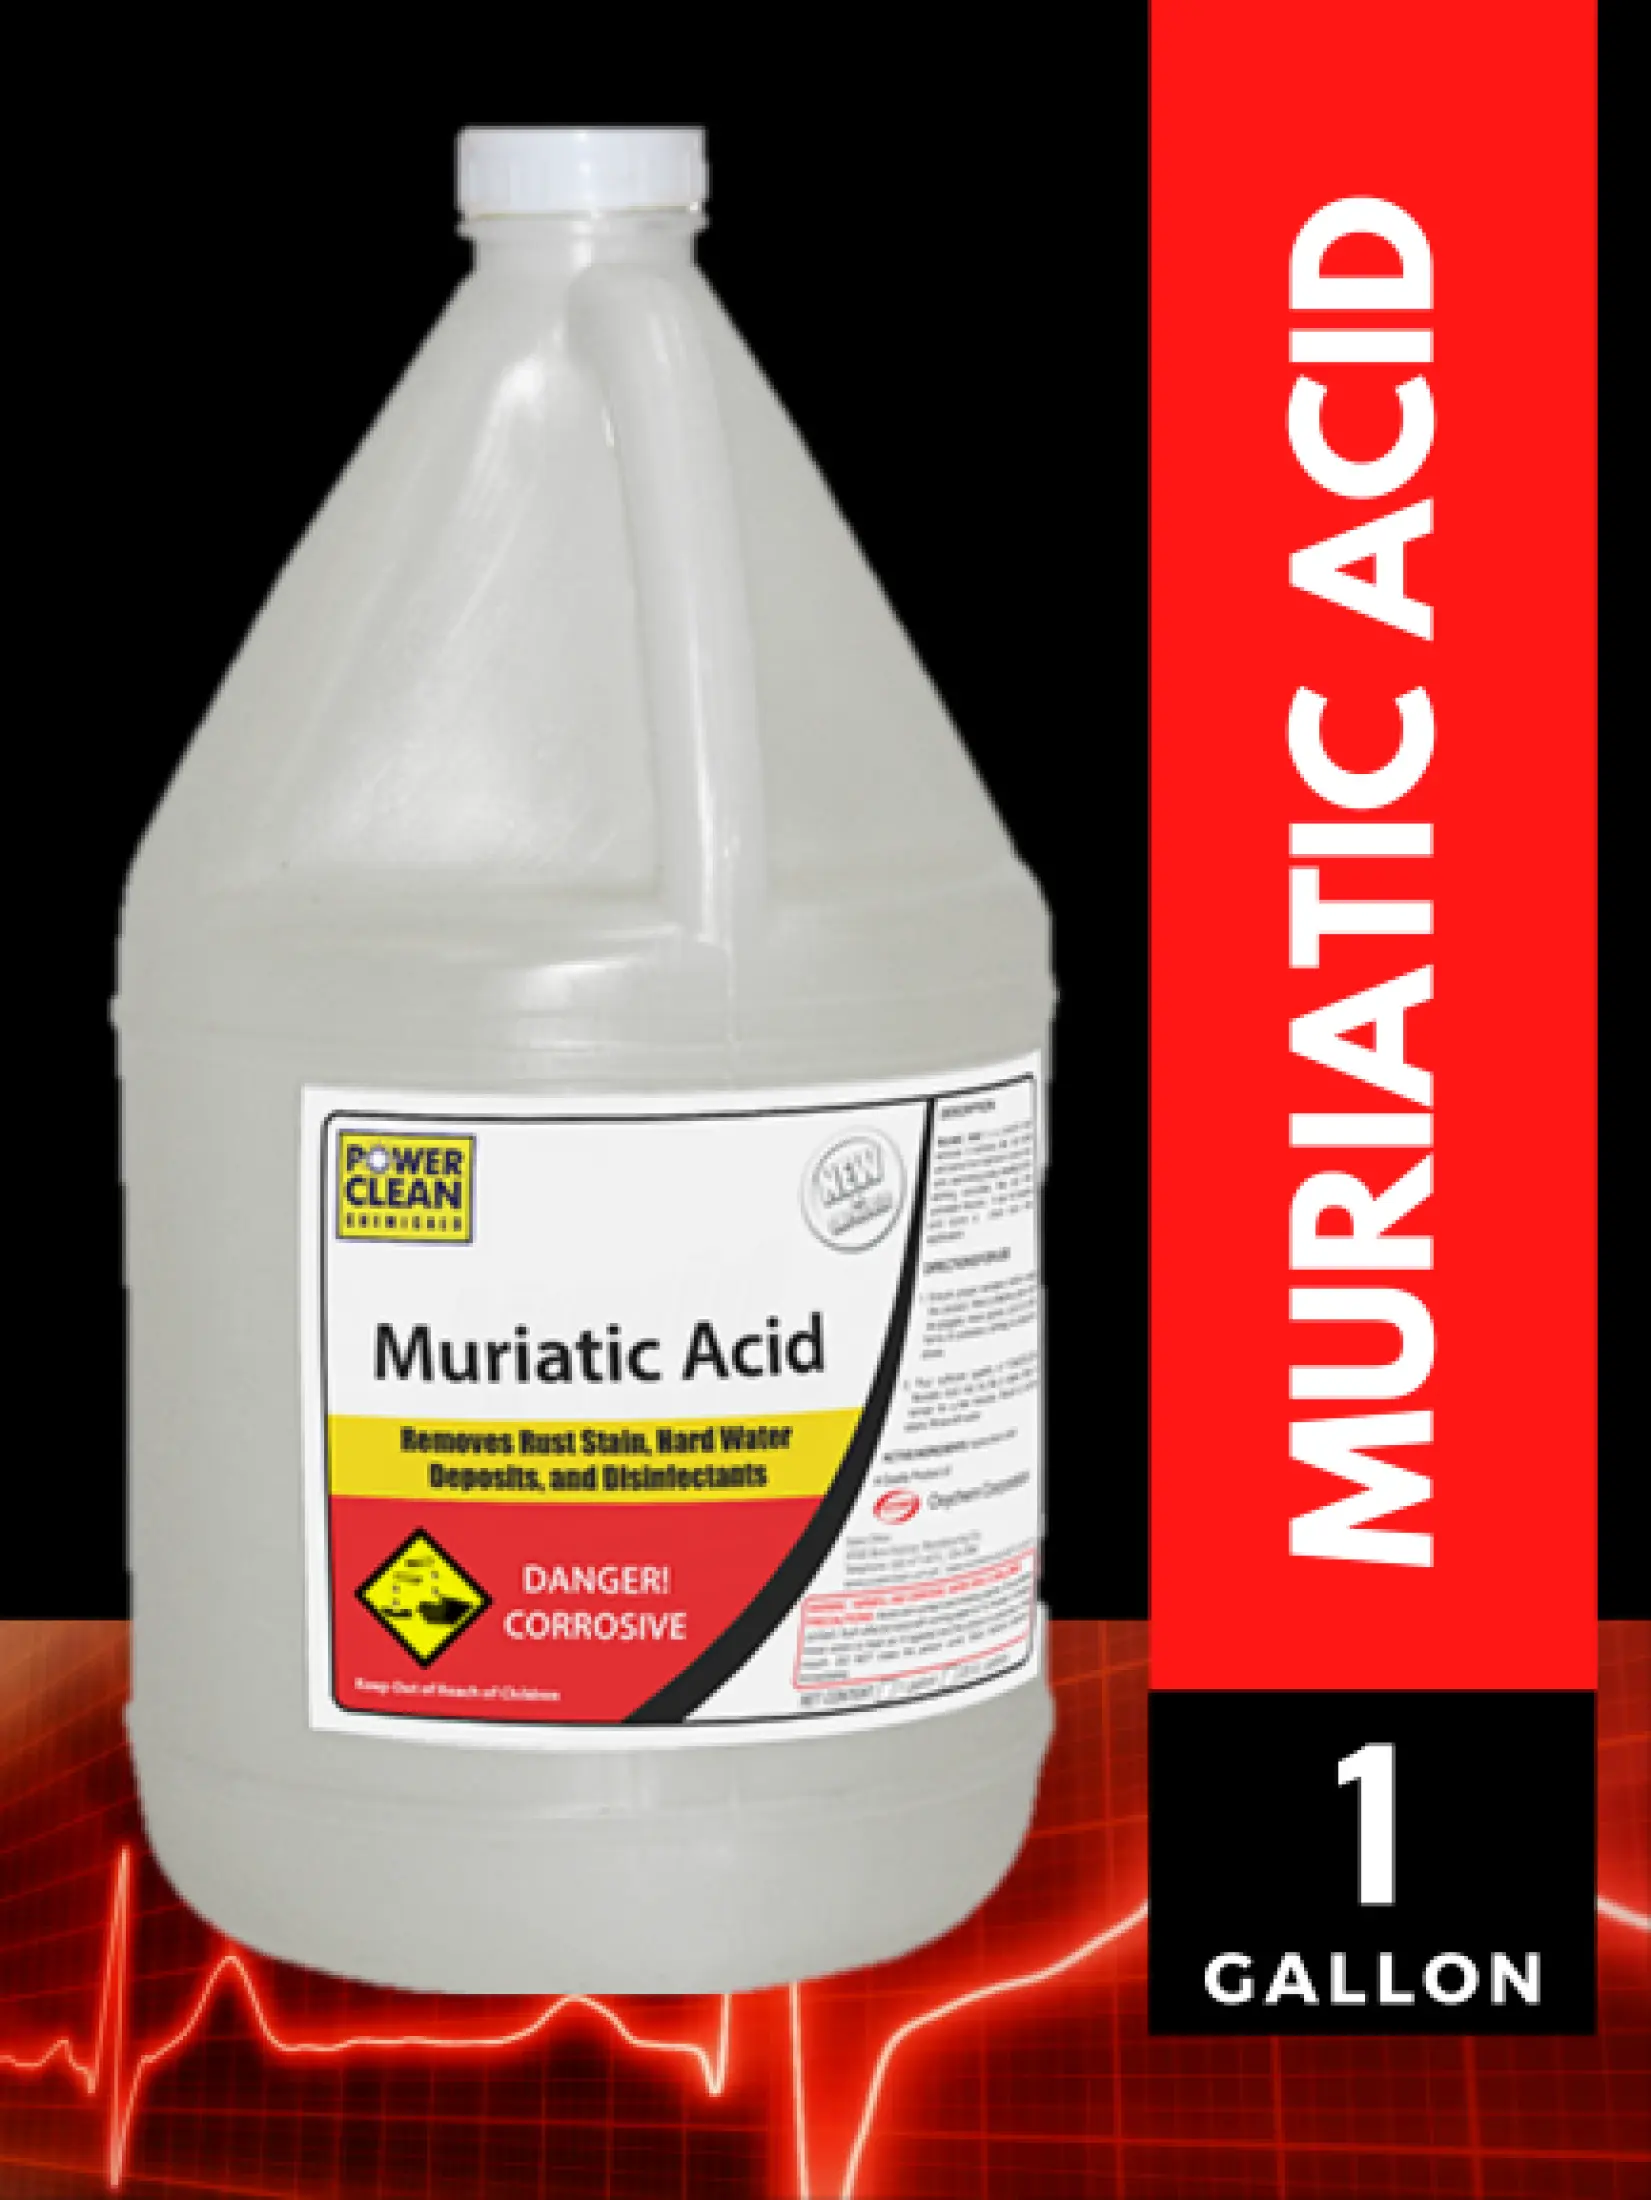 Heavy Duty Muriatic Acid, How To Clean Pool Tiles With Muriatic Acid